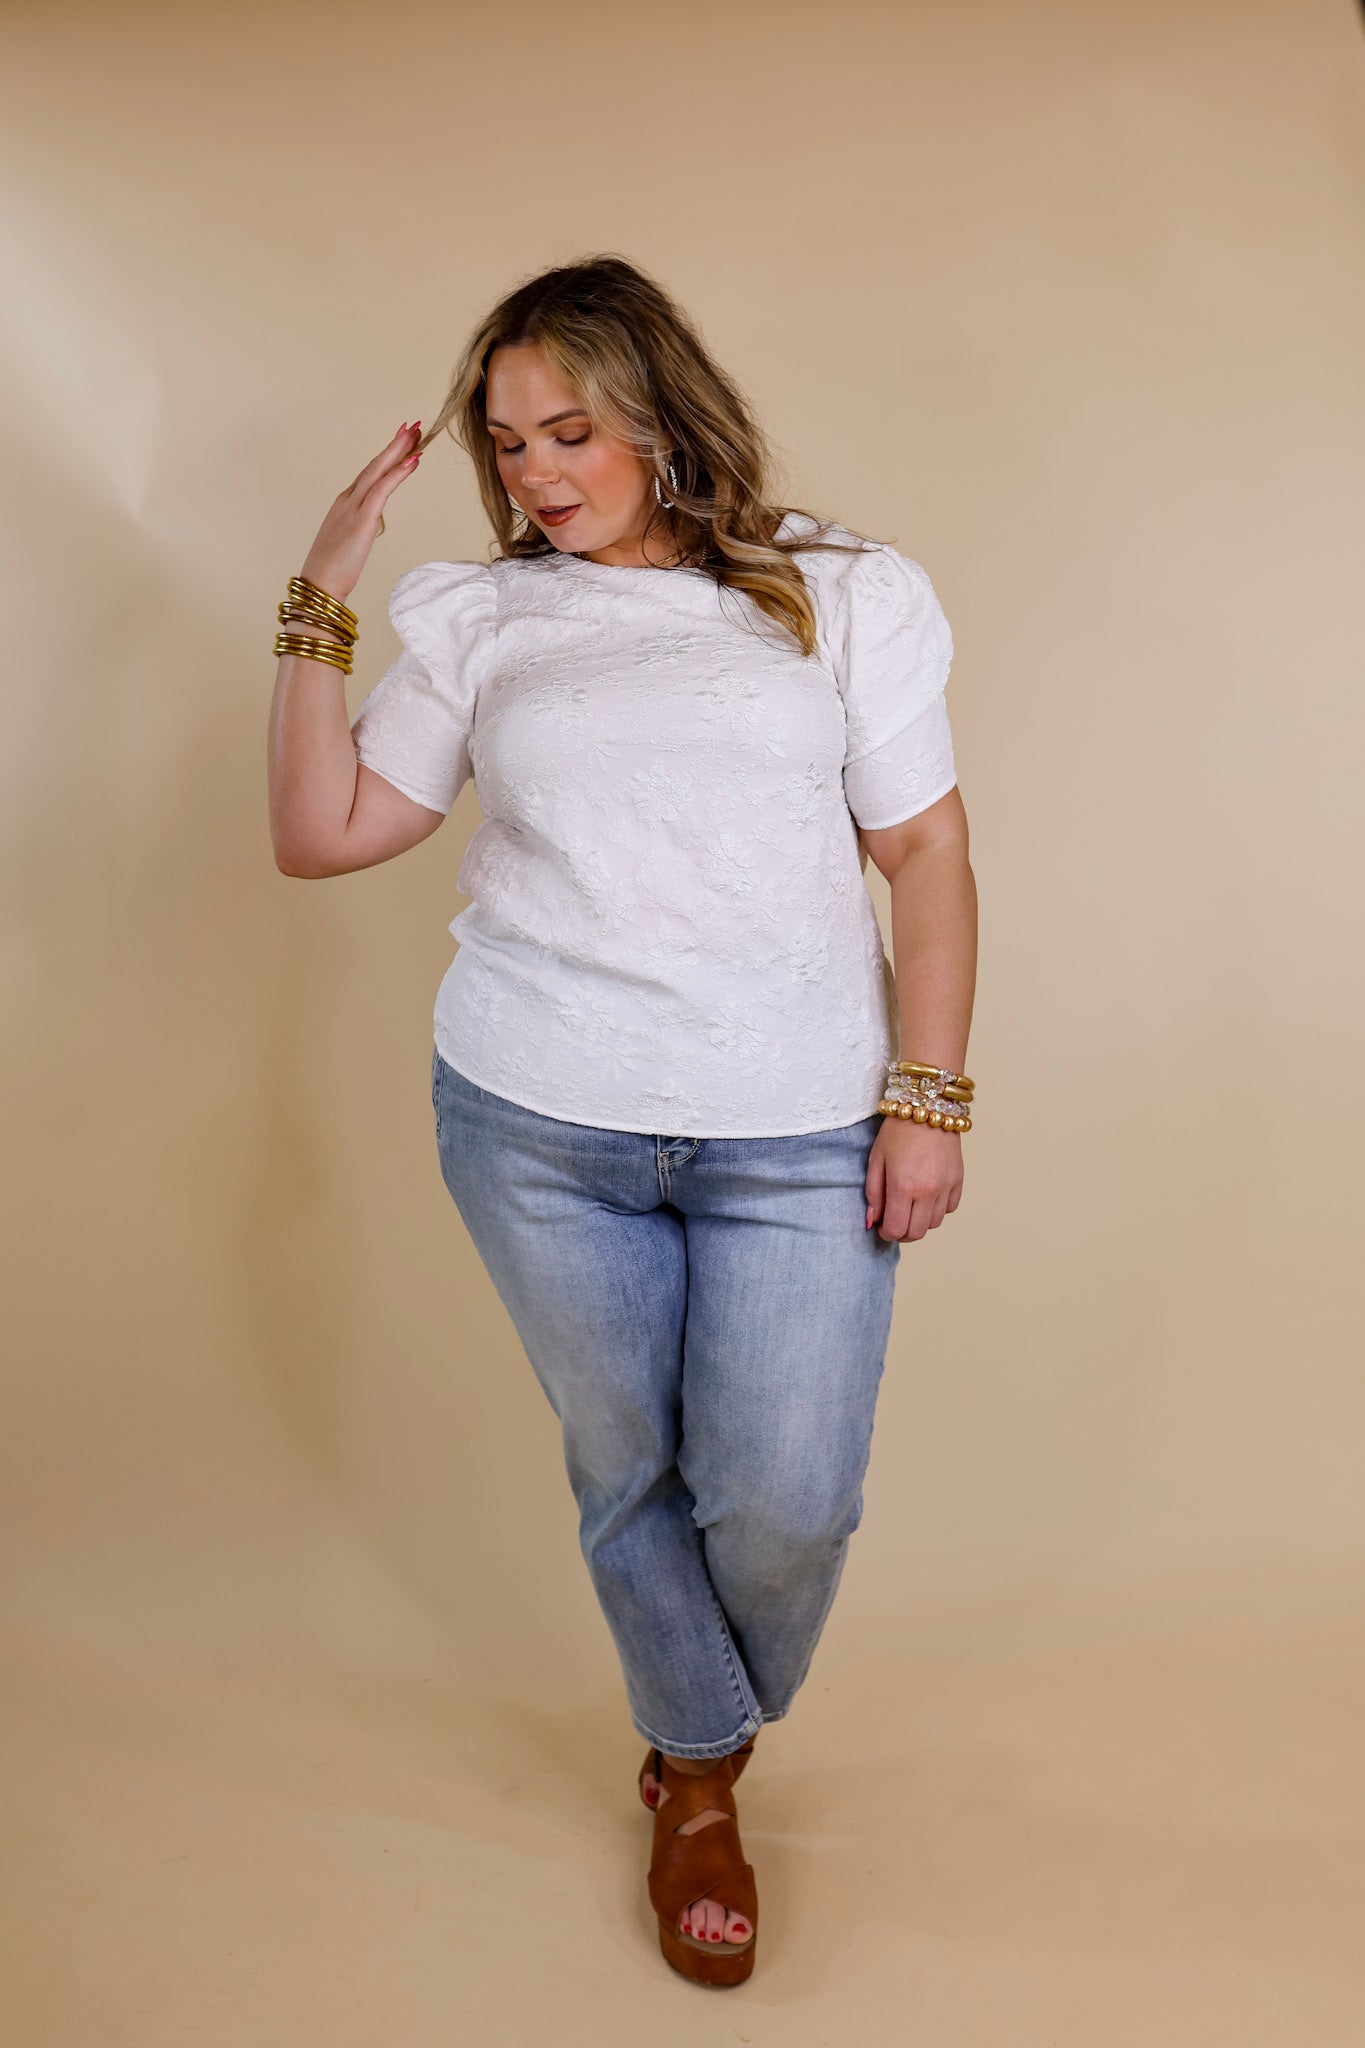 Fab Feeling Puff Shoulder Floral Embossed Top in White - Giddy Up Glamour Boutique